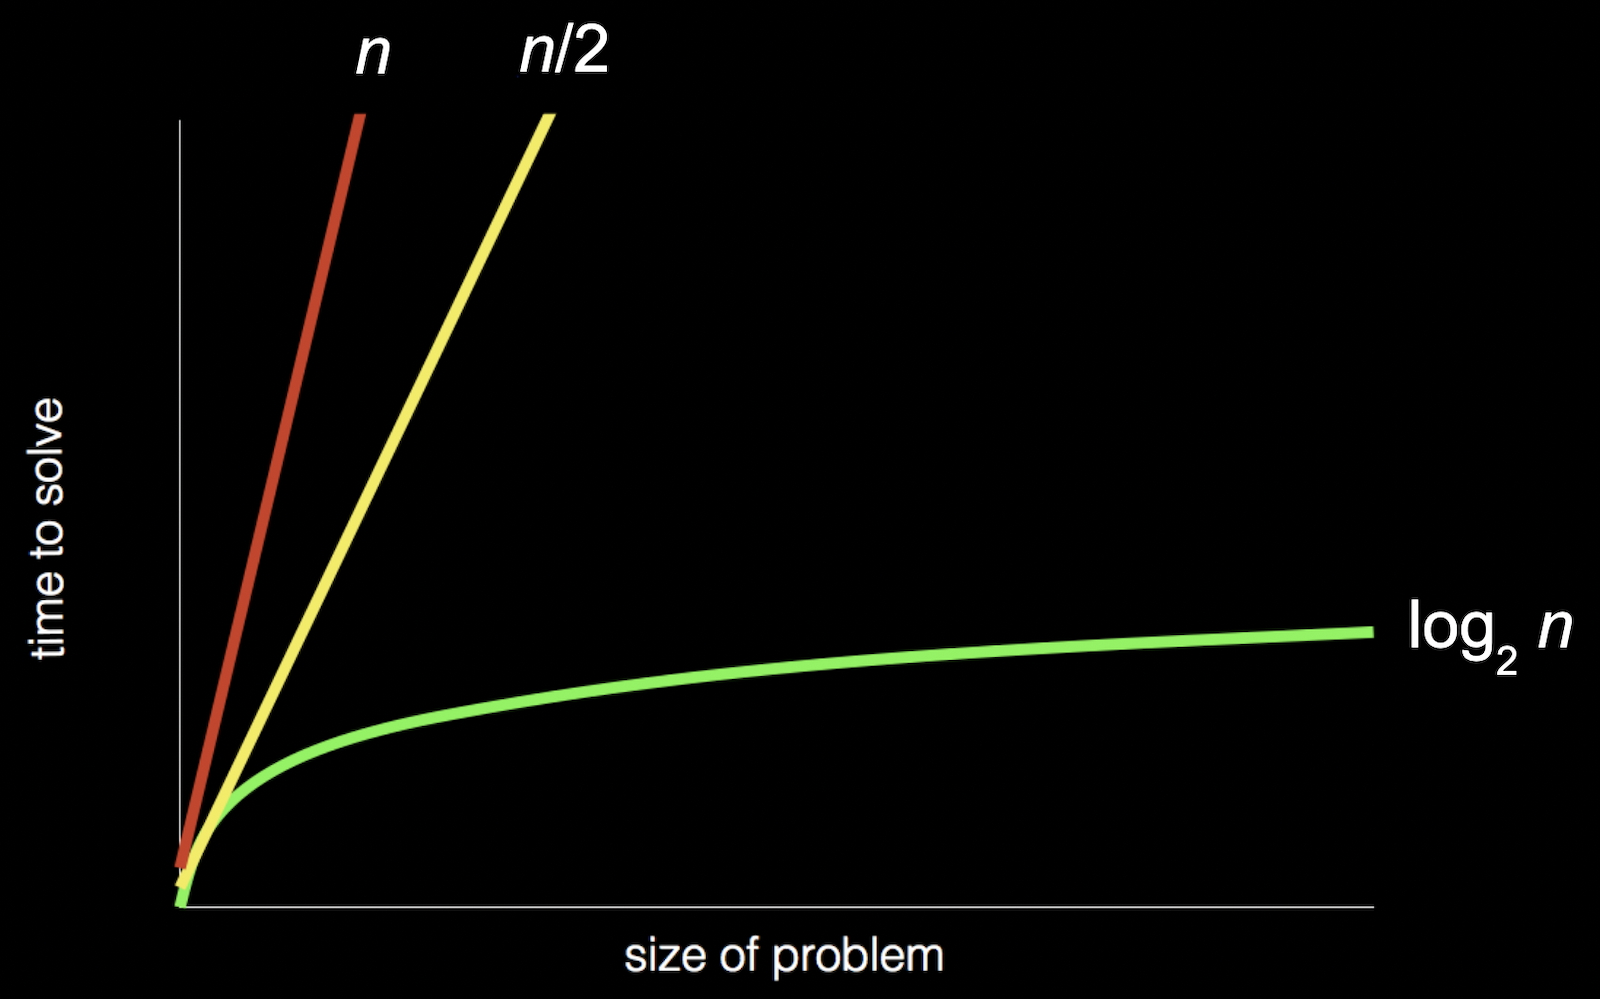 chart with: "size of problem" as x-axis; "time to solve" as y-axis; red, steep straight line from origin to top of graph labeled "n"; yellow, less steep straight line from origin to top of graph labeled "n/2"; green, curved line that gets less and less steep from origin to right of graph labeled "log_2  n"